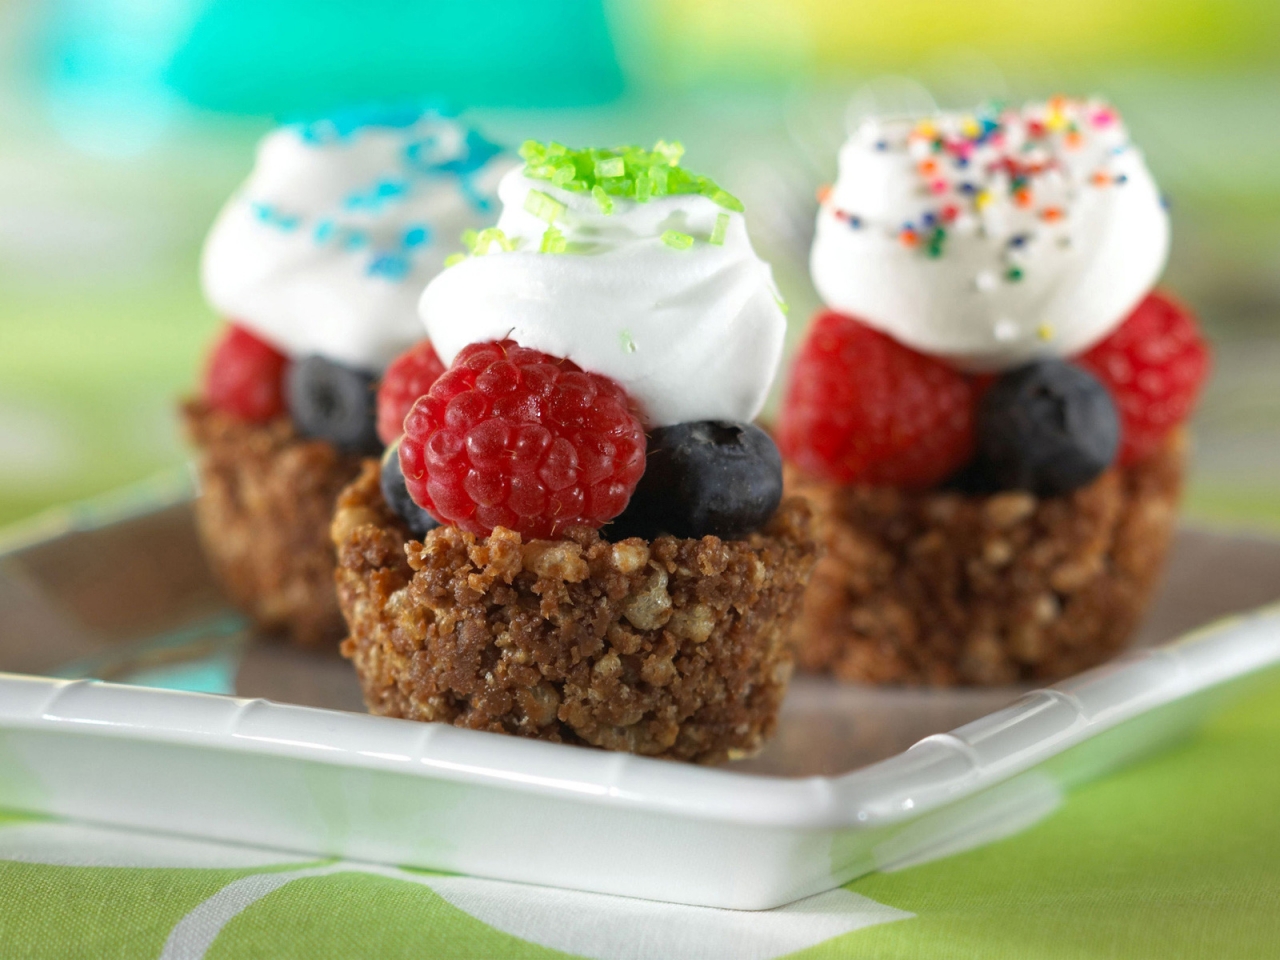 Cereal and Fruits Cakes for 1280 x 960 resolution